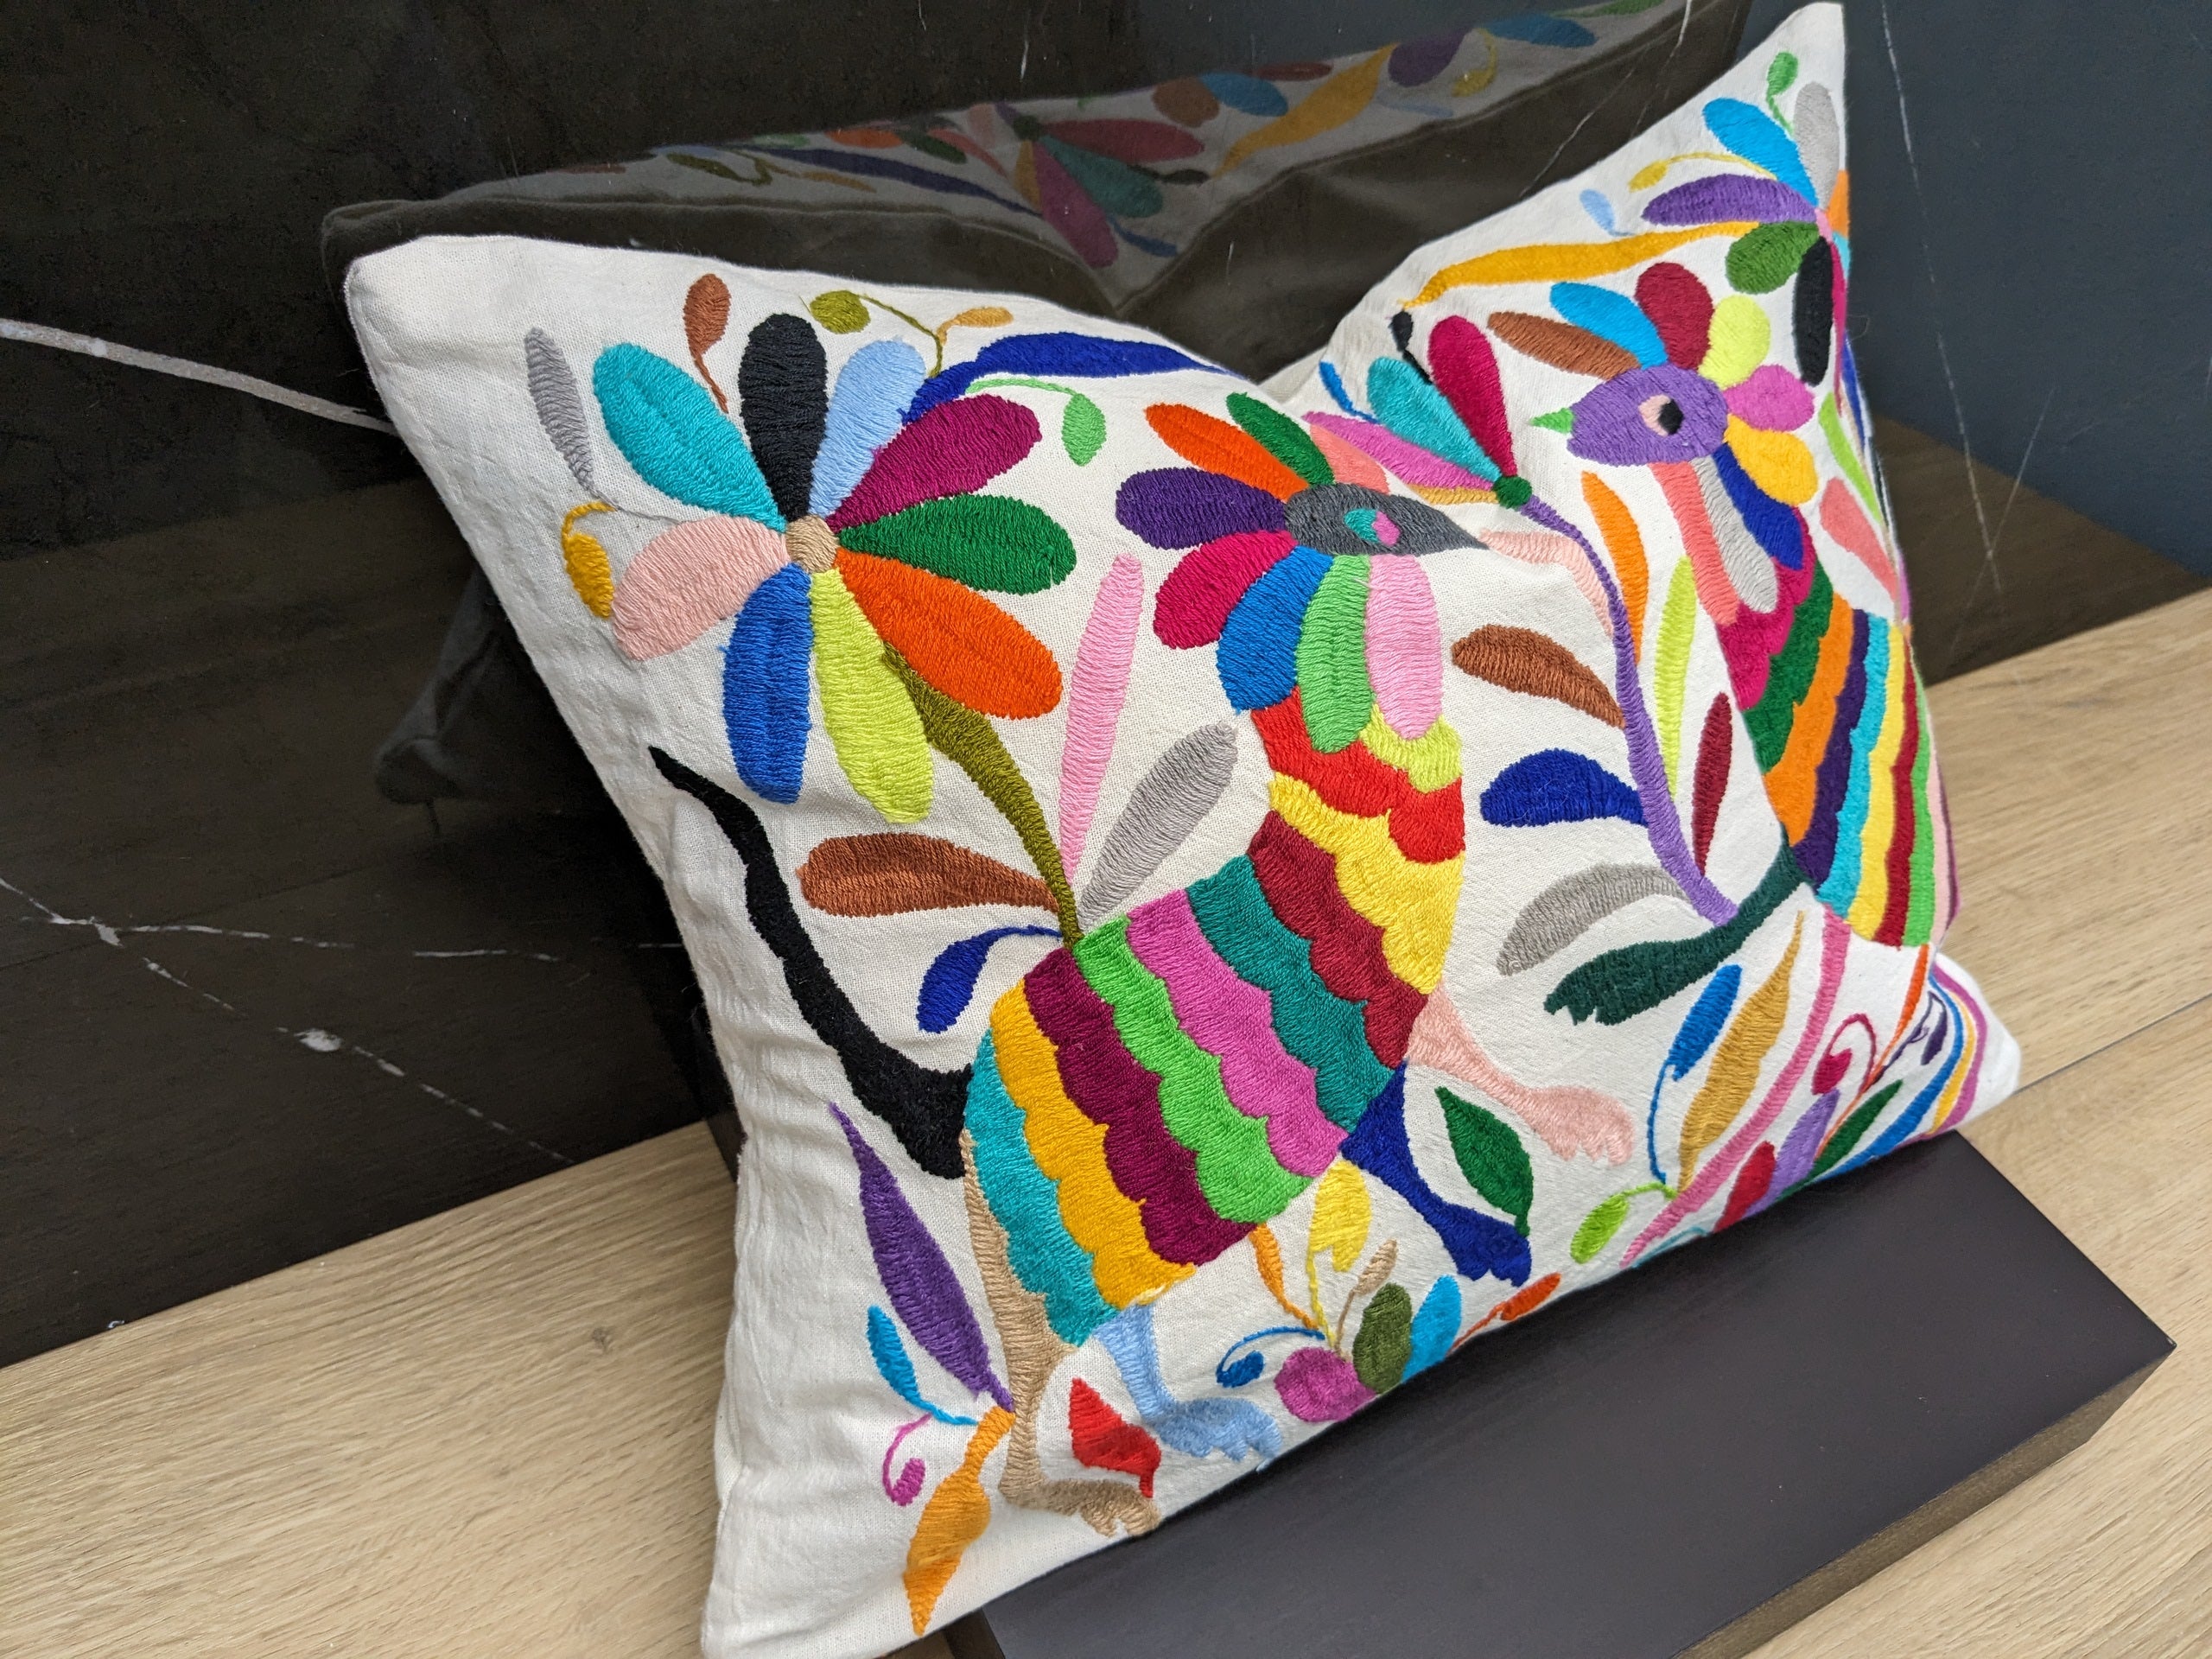 Rectangle Otomi Tenango Pillow Cover with Hand Embroidered Flowers and Animals in Vibrant Colors. Handmade in Mexico. We package and ship from the USA. Buy now at www.felipeandgrace.com.